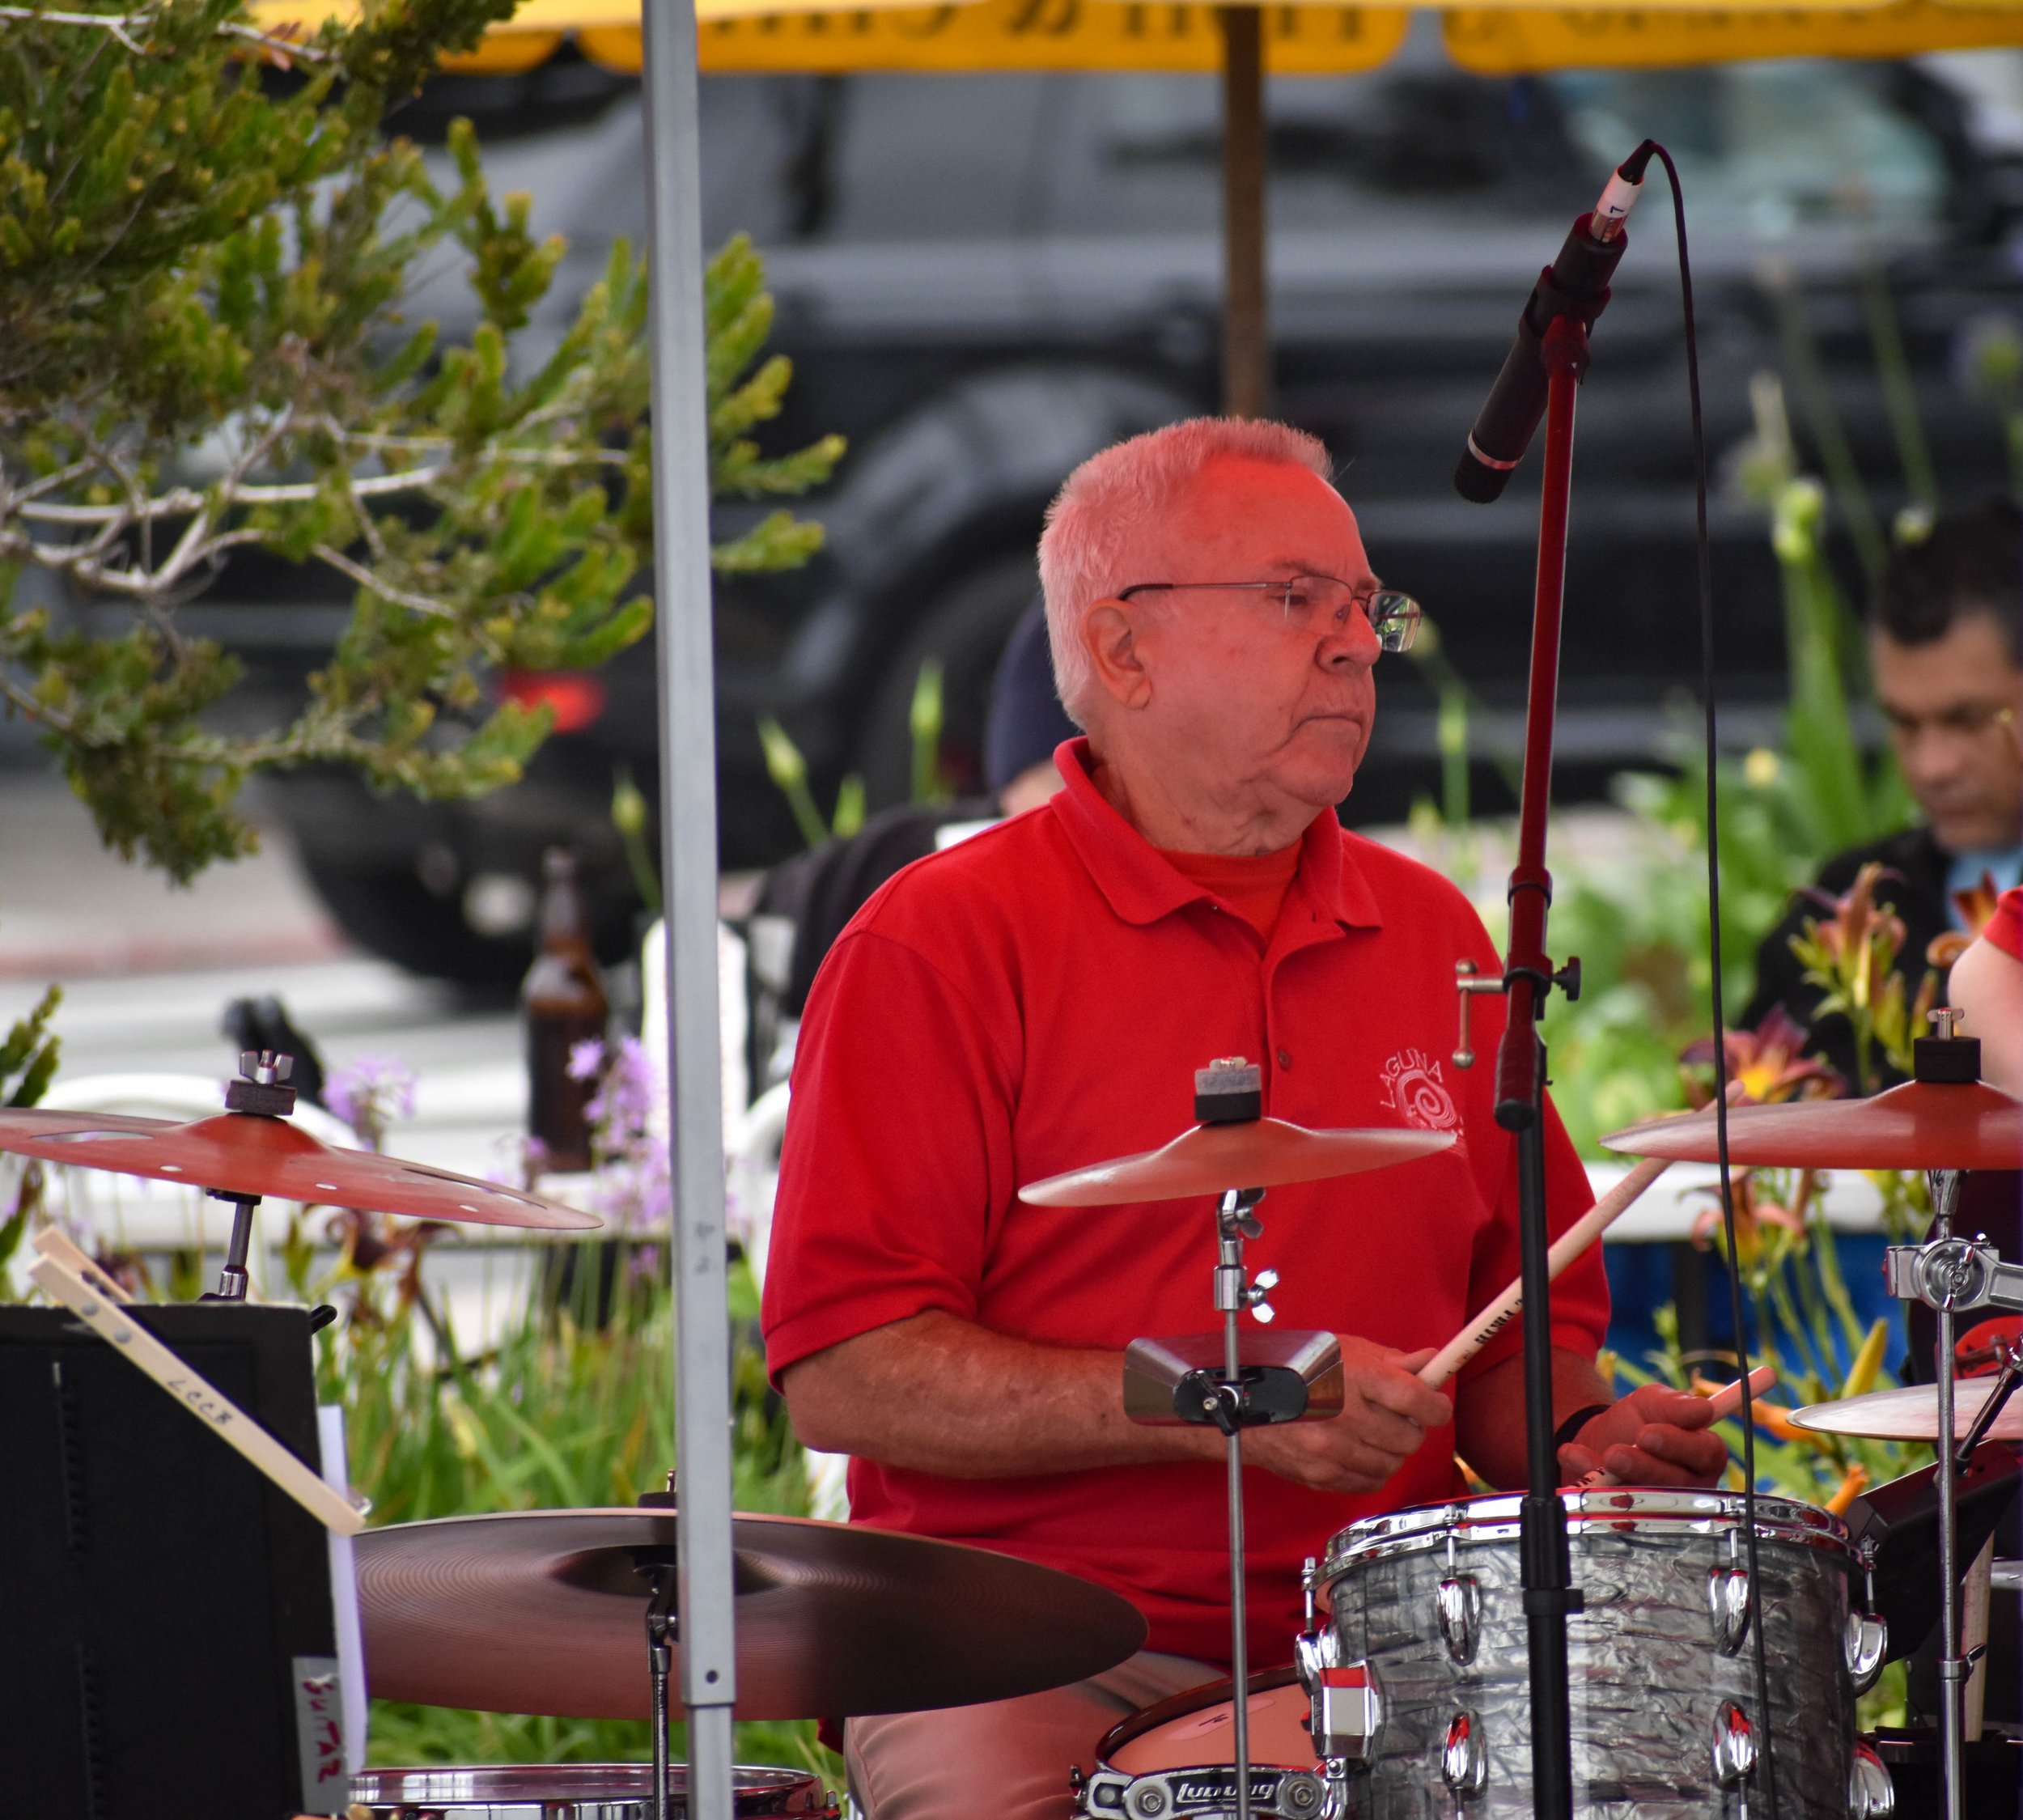 05-29-2023 LCCB and Jazz Band Memorial Day Concerts by Peyton Webster117-40.jpg